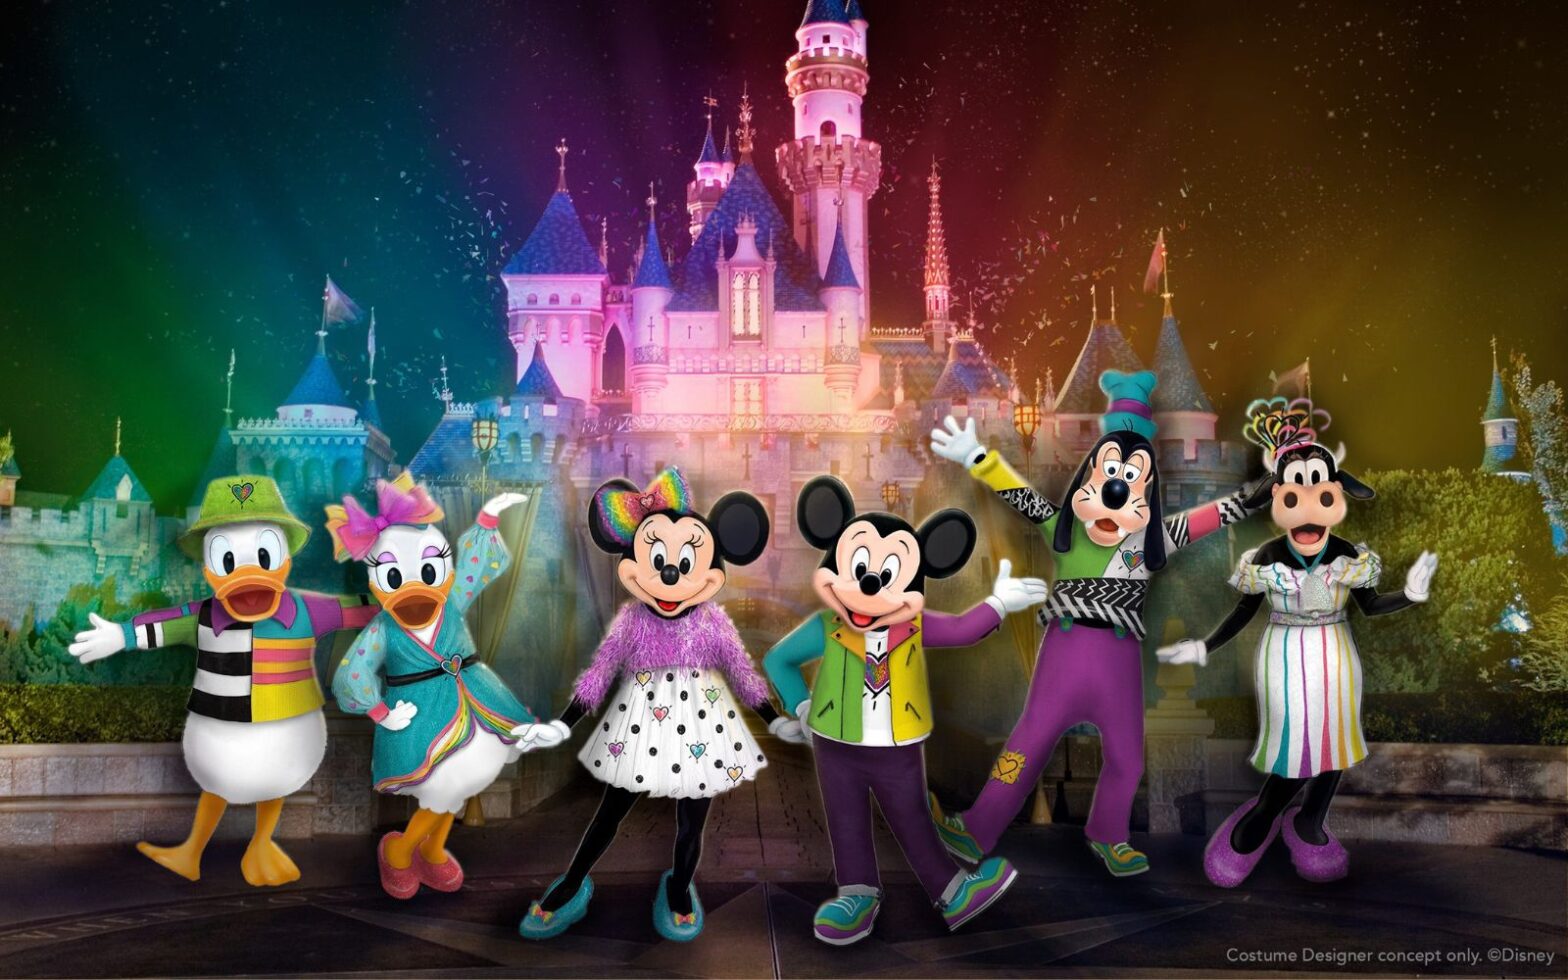 Disneyland To Host First Official 'Pride Nite' In 2023